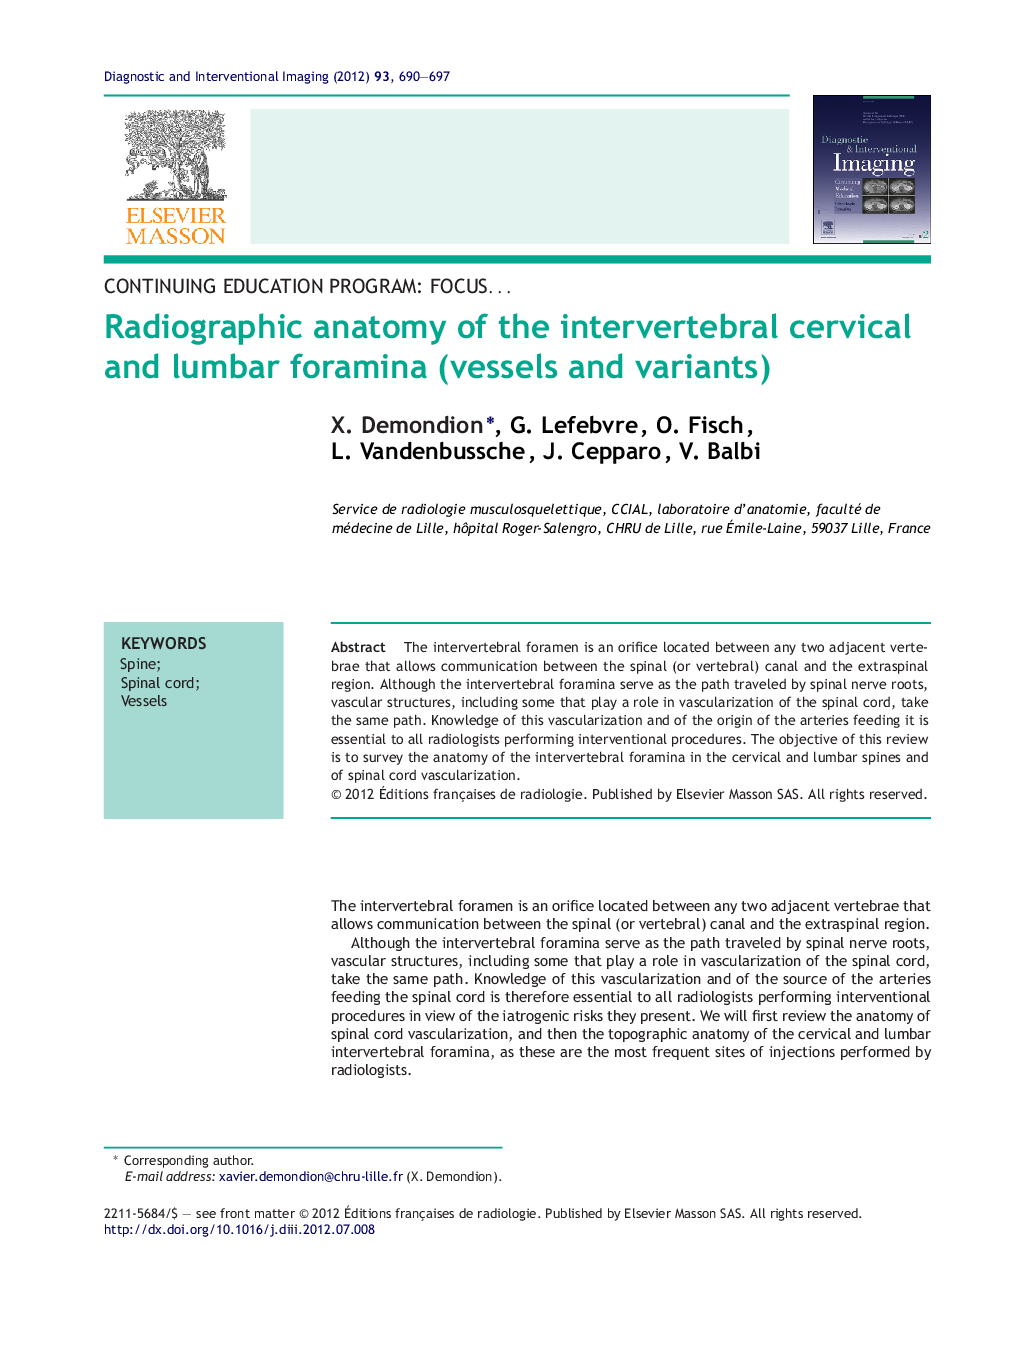 Radiographic anatomy of the intervertebral cervical and lumbar foramina (vessels and variants)